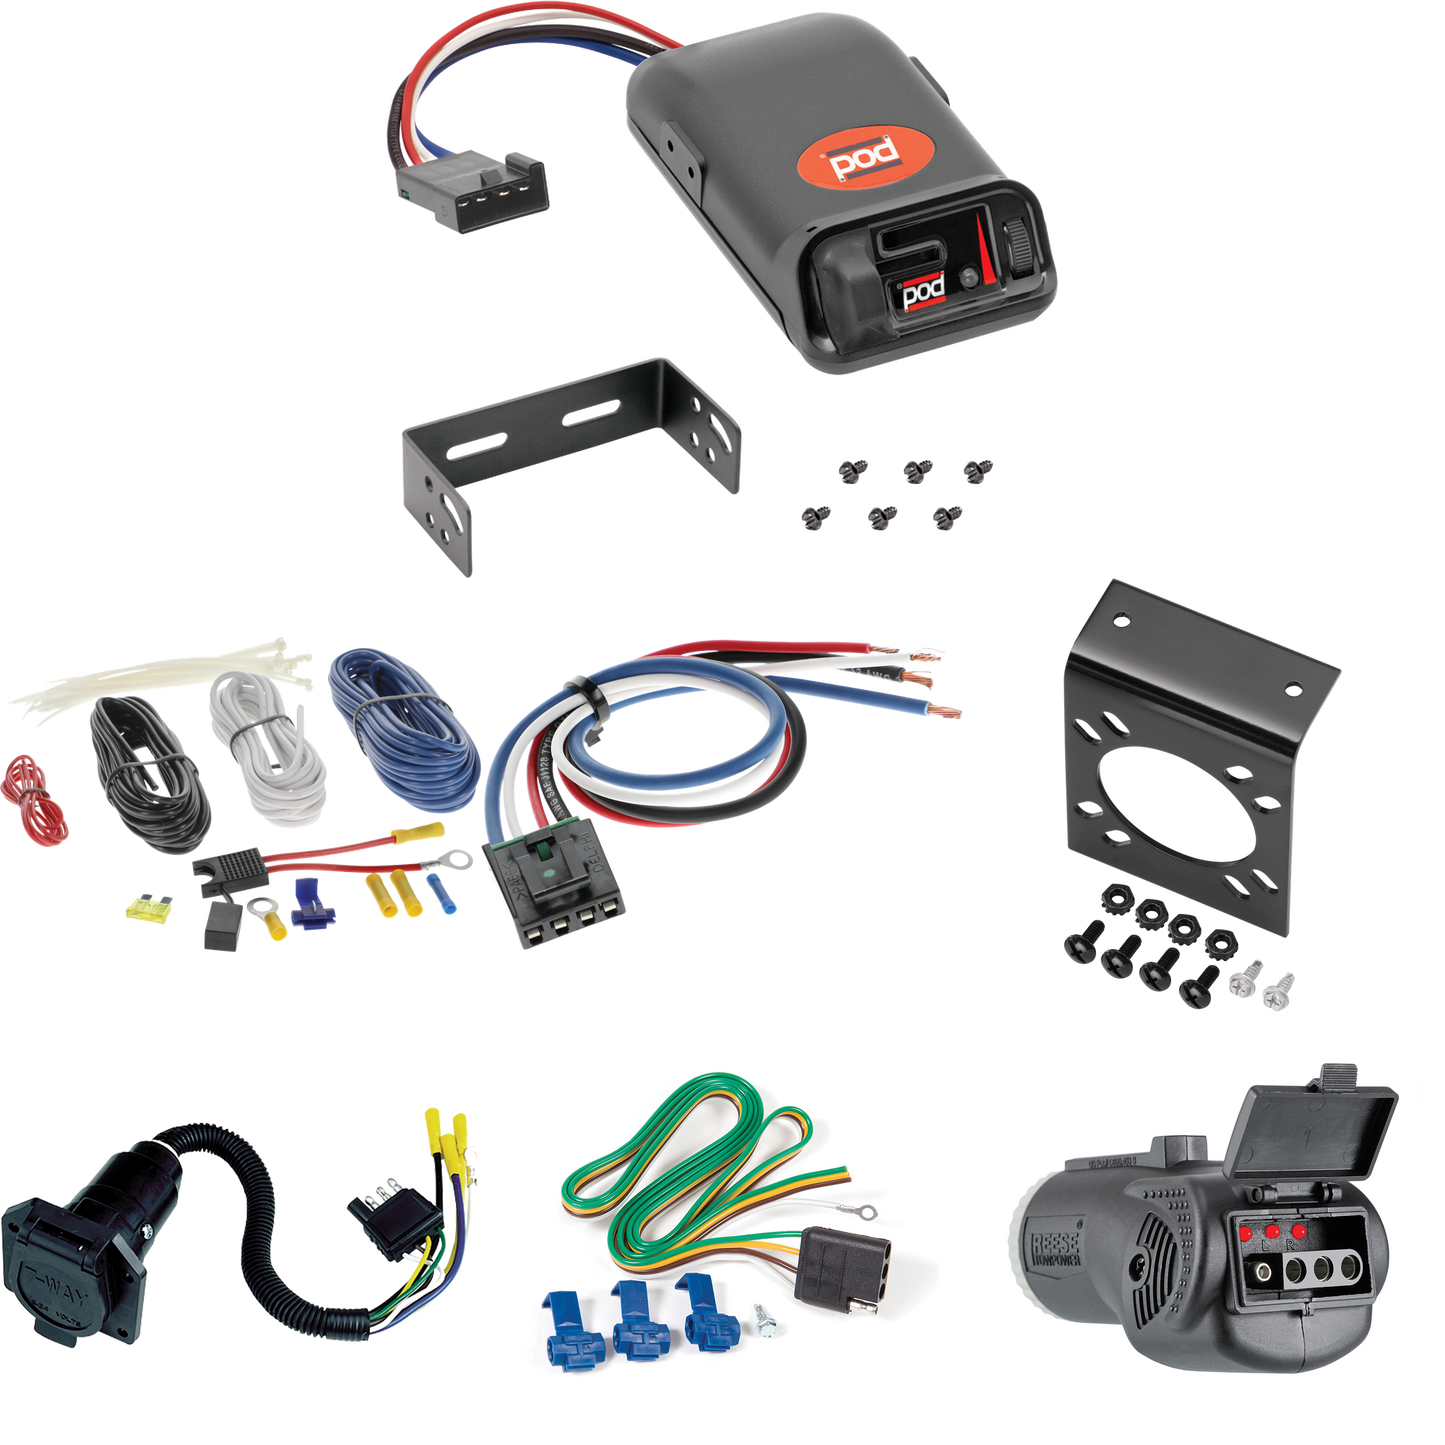 Fits 1980-1983 Lincoln Mark VI 7-Way RV Wiring + Pro Series POD Brake Control + Generic BC Wiring Adapter + 2 in 1 Tester & 7-Way to 4-Way Adapter By Reese Towpower